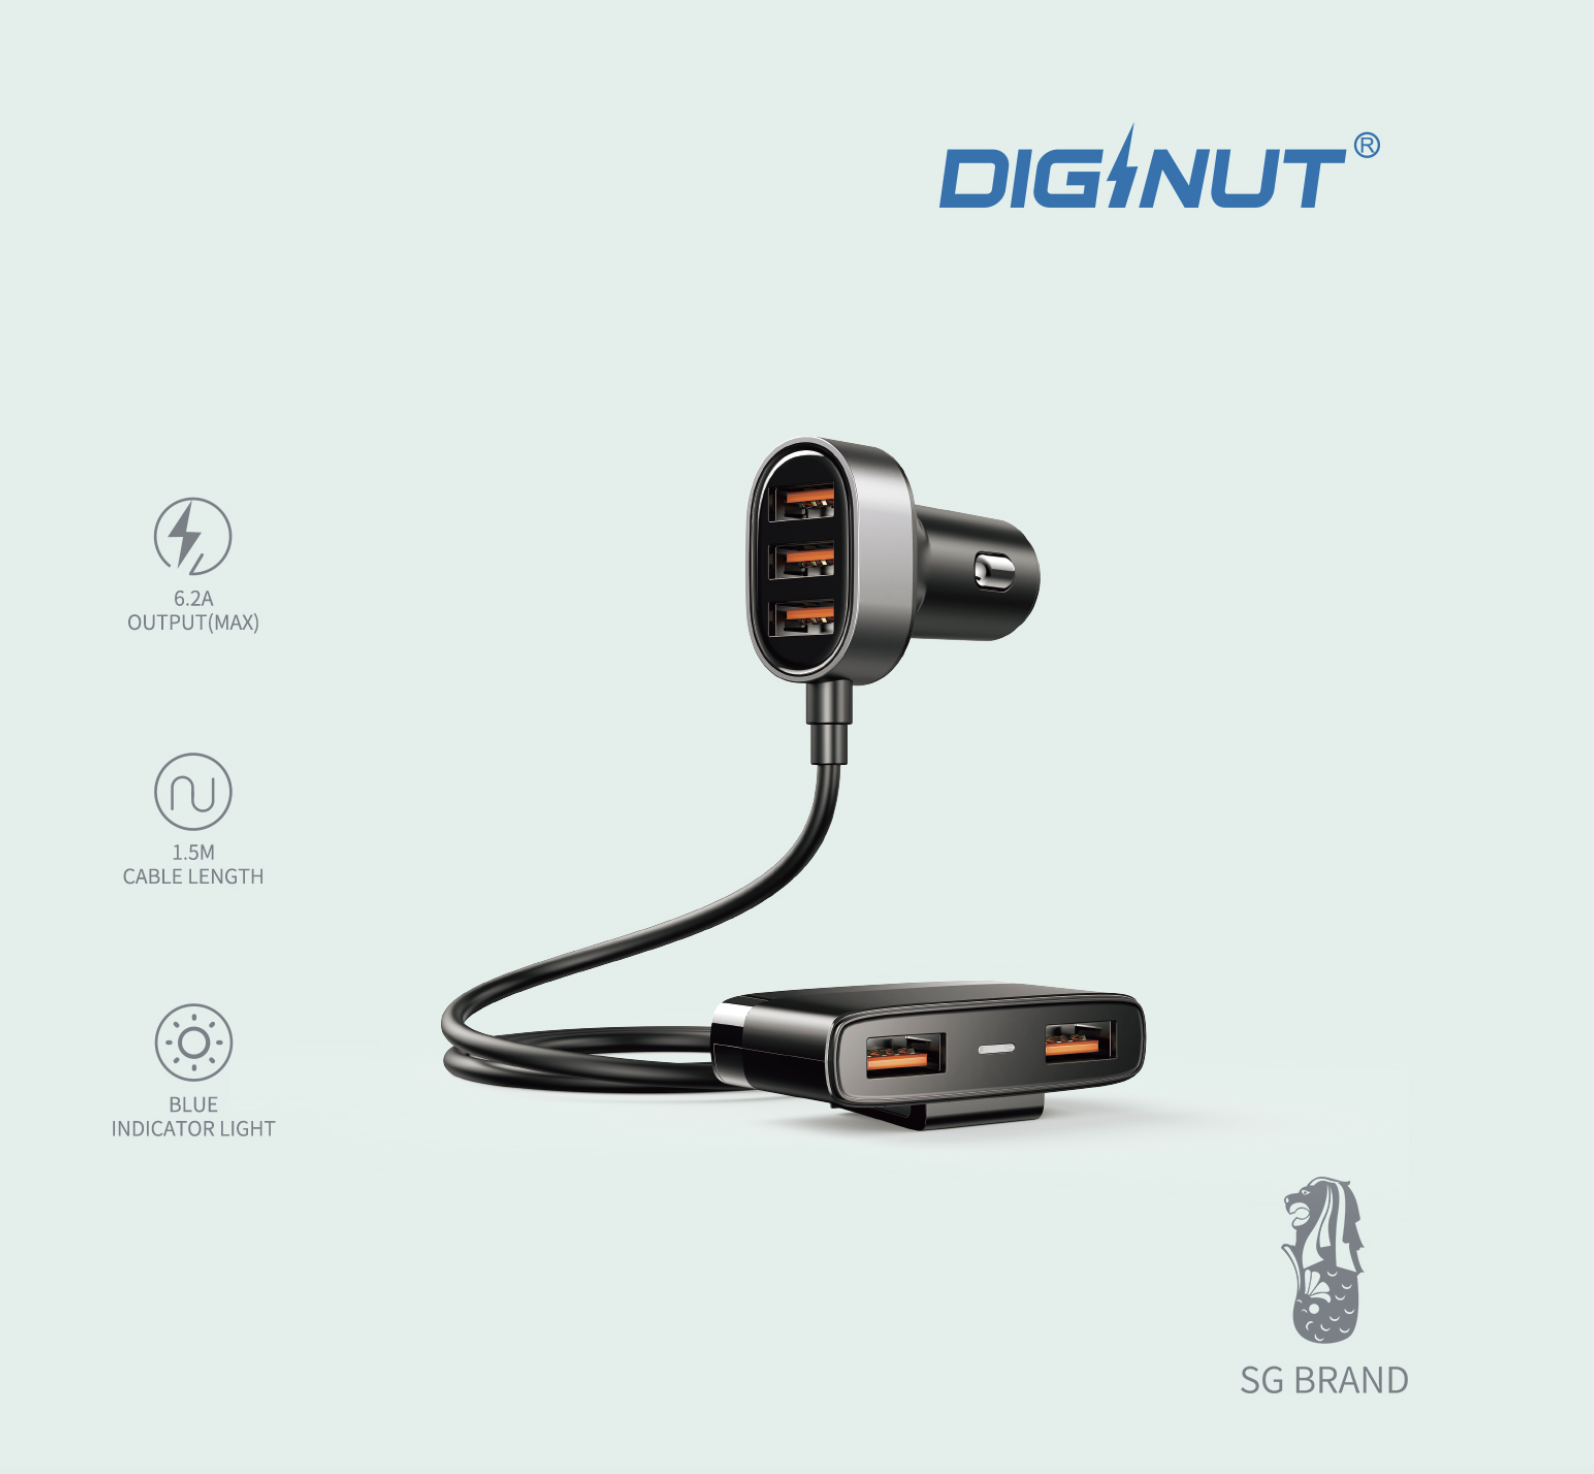 Diginut - CP-15 Multi 5 Ports (3+2) USB Car Charger 6.2A Output (Max)/ Fast Charging